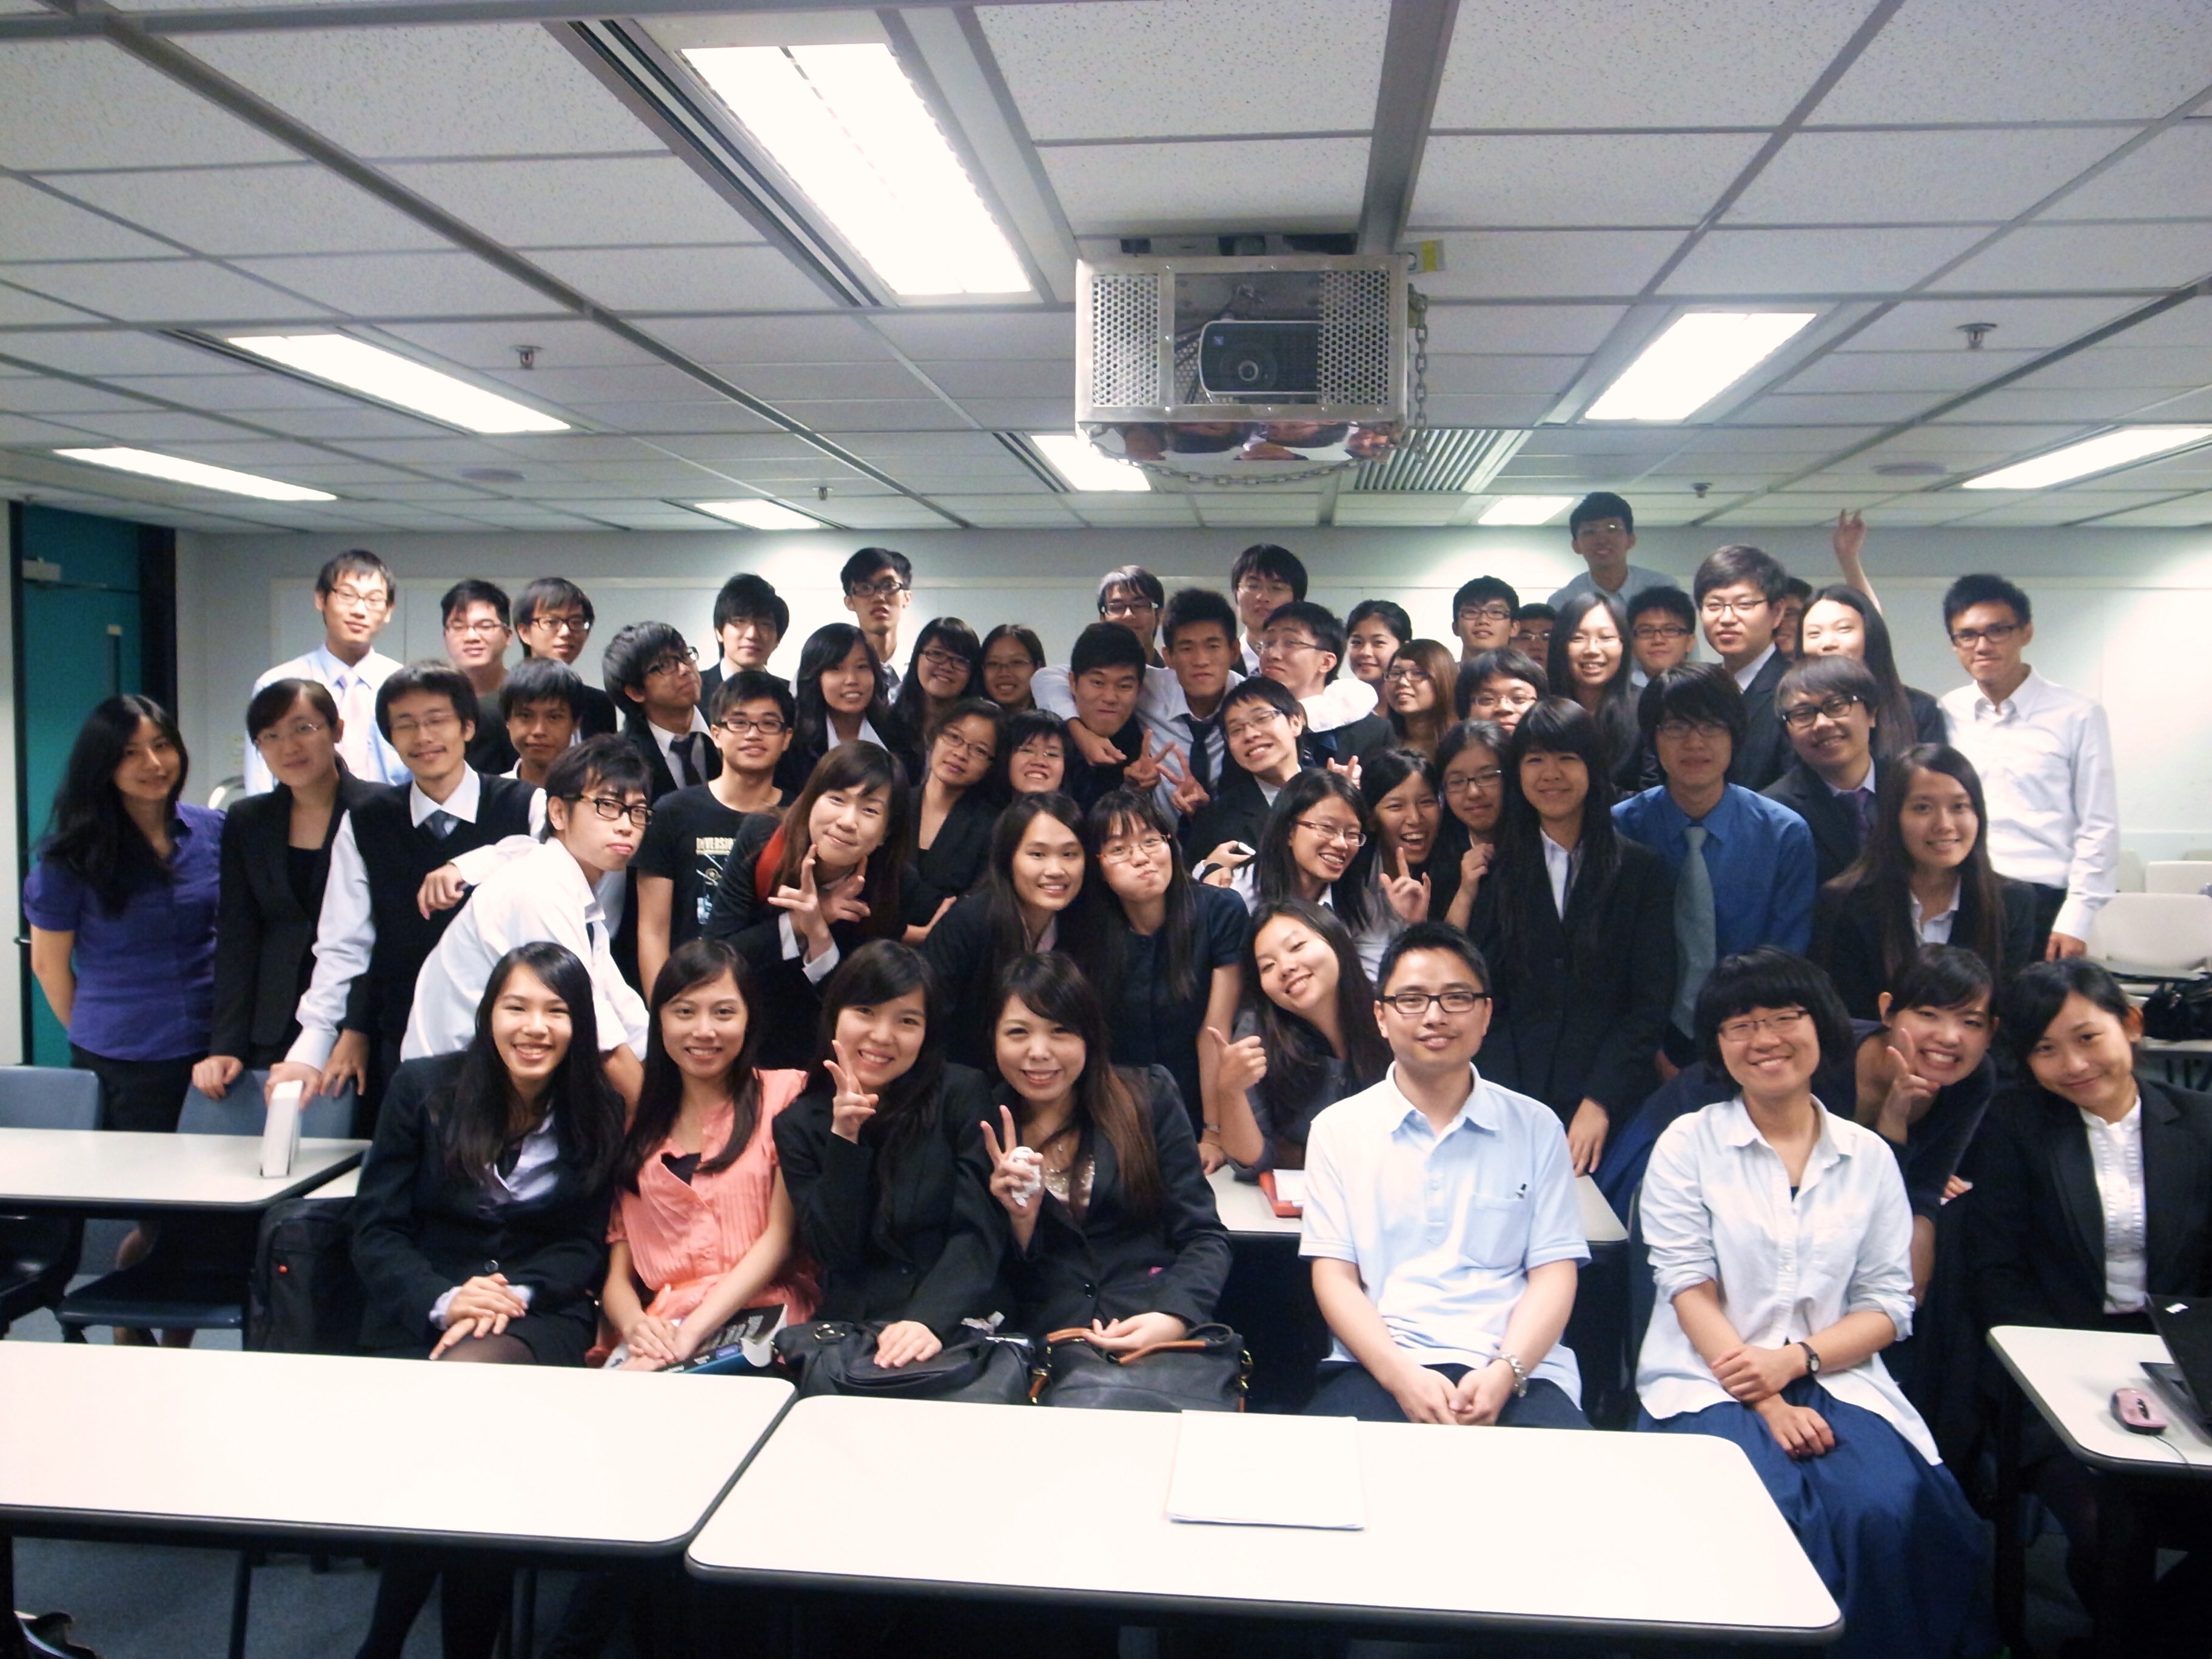 Dr. Louis Lam (first row in front, second right) and his class of Year 3 chemical engineering undergraduate students in 2012 at HKUST when he was Visiting Assistant Professor.